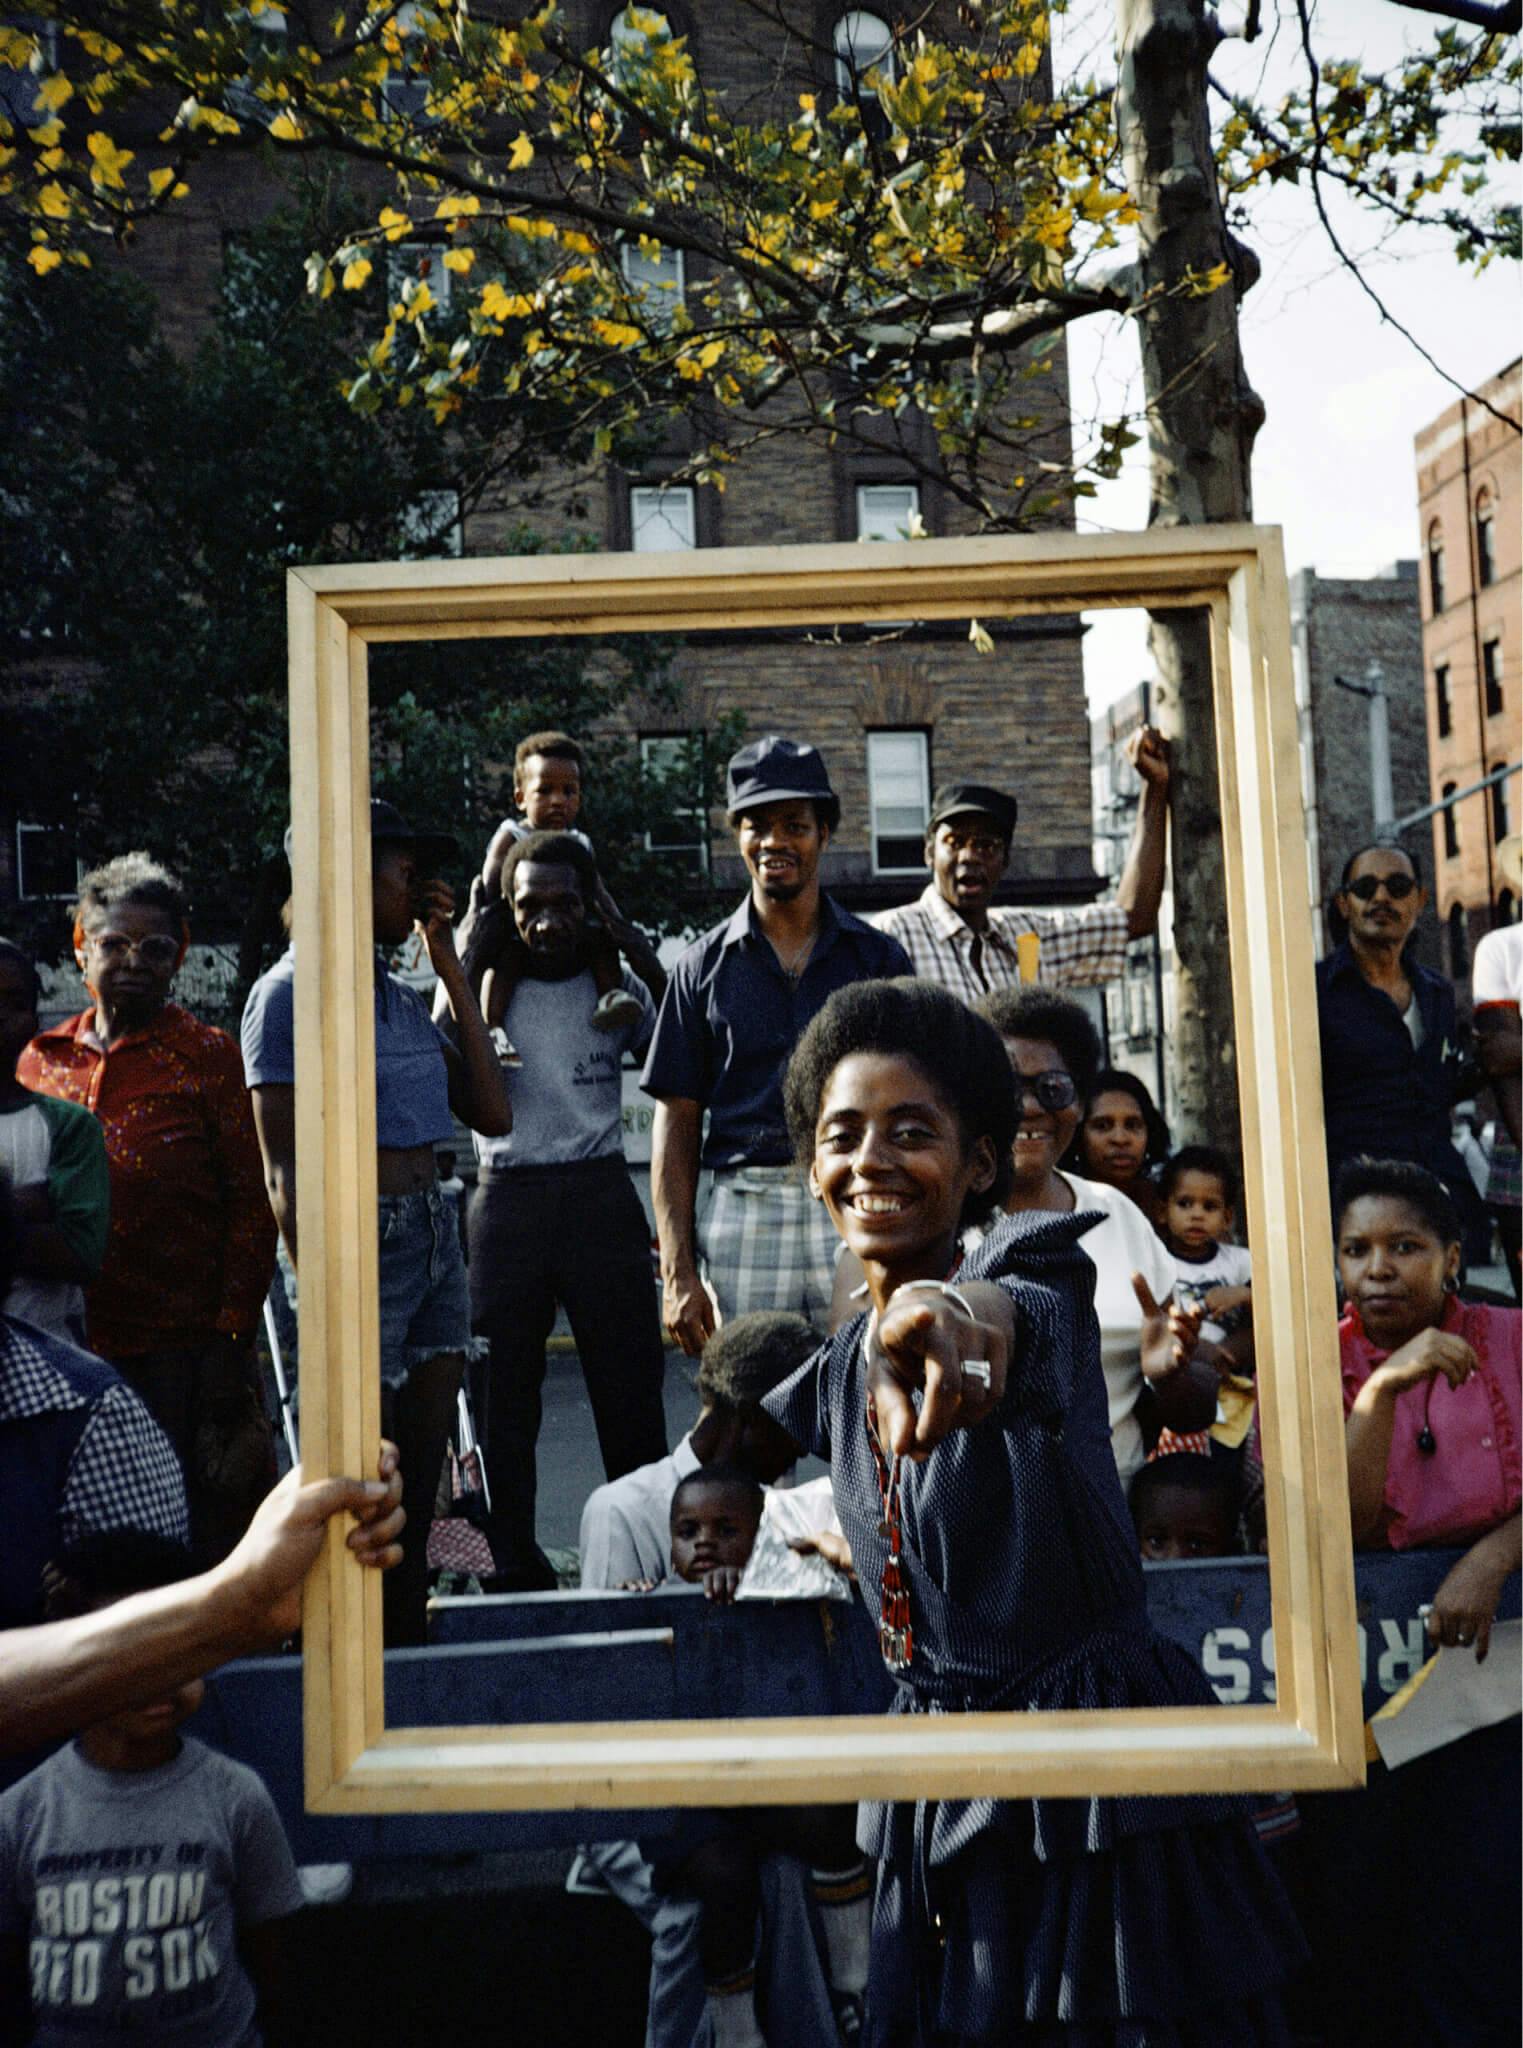 A group of figures appear within a wooden picture frame, while a young person points directly at the camera, smiling.